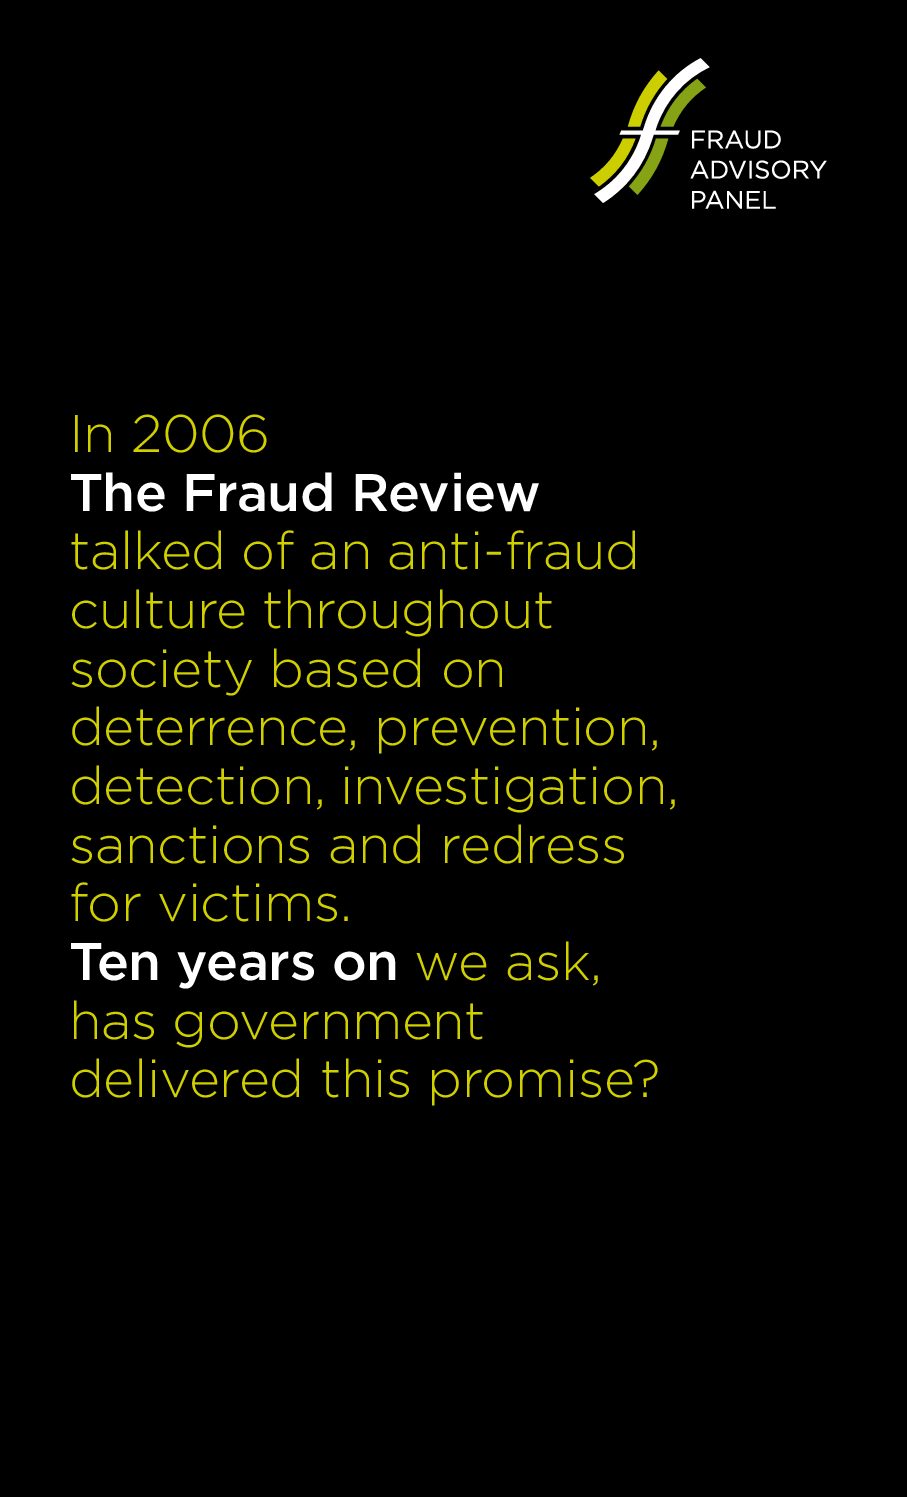 The fraud review ten years on Jul16 document cover